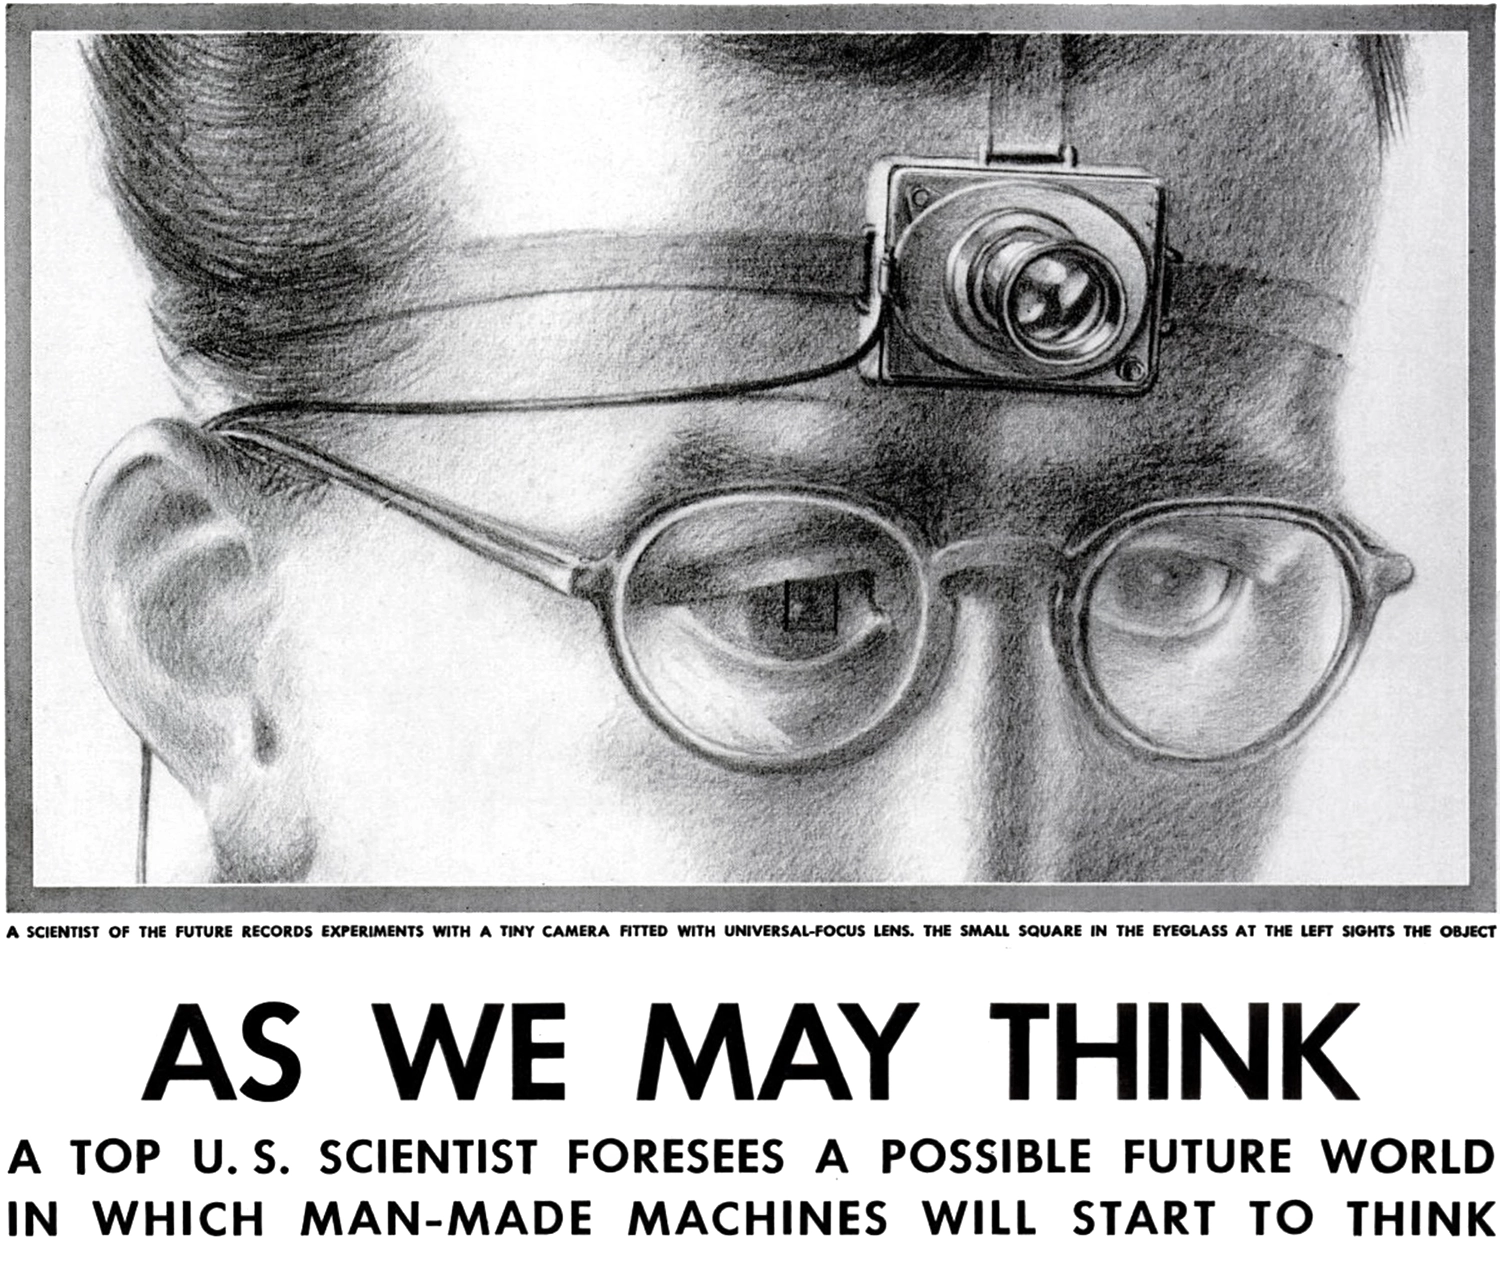 A scientist wearing a 1940s-futuristic camera on his forehead. Captioned: “As We May Think: A top U.S. scientist foresees a possible future world in which man-made machines start to think.”